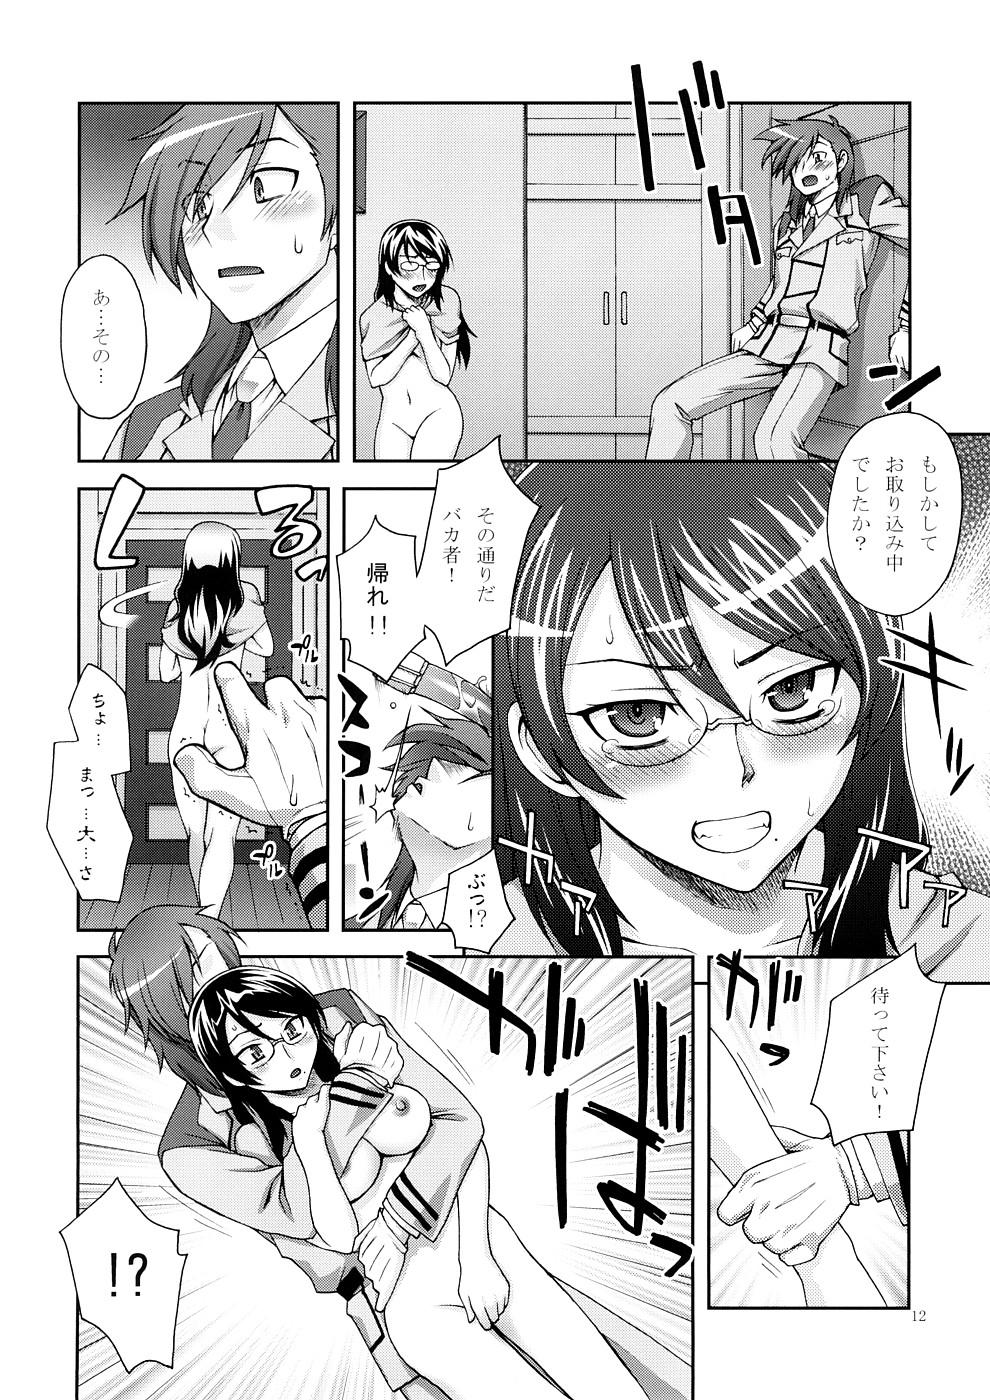 Screaming GLASSES - Gundam 00 All - Page 11